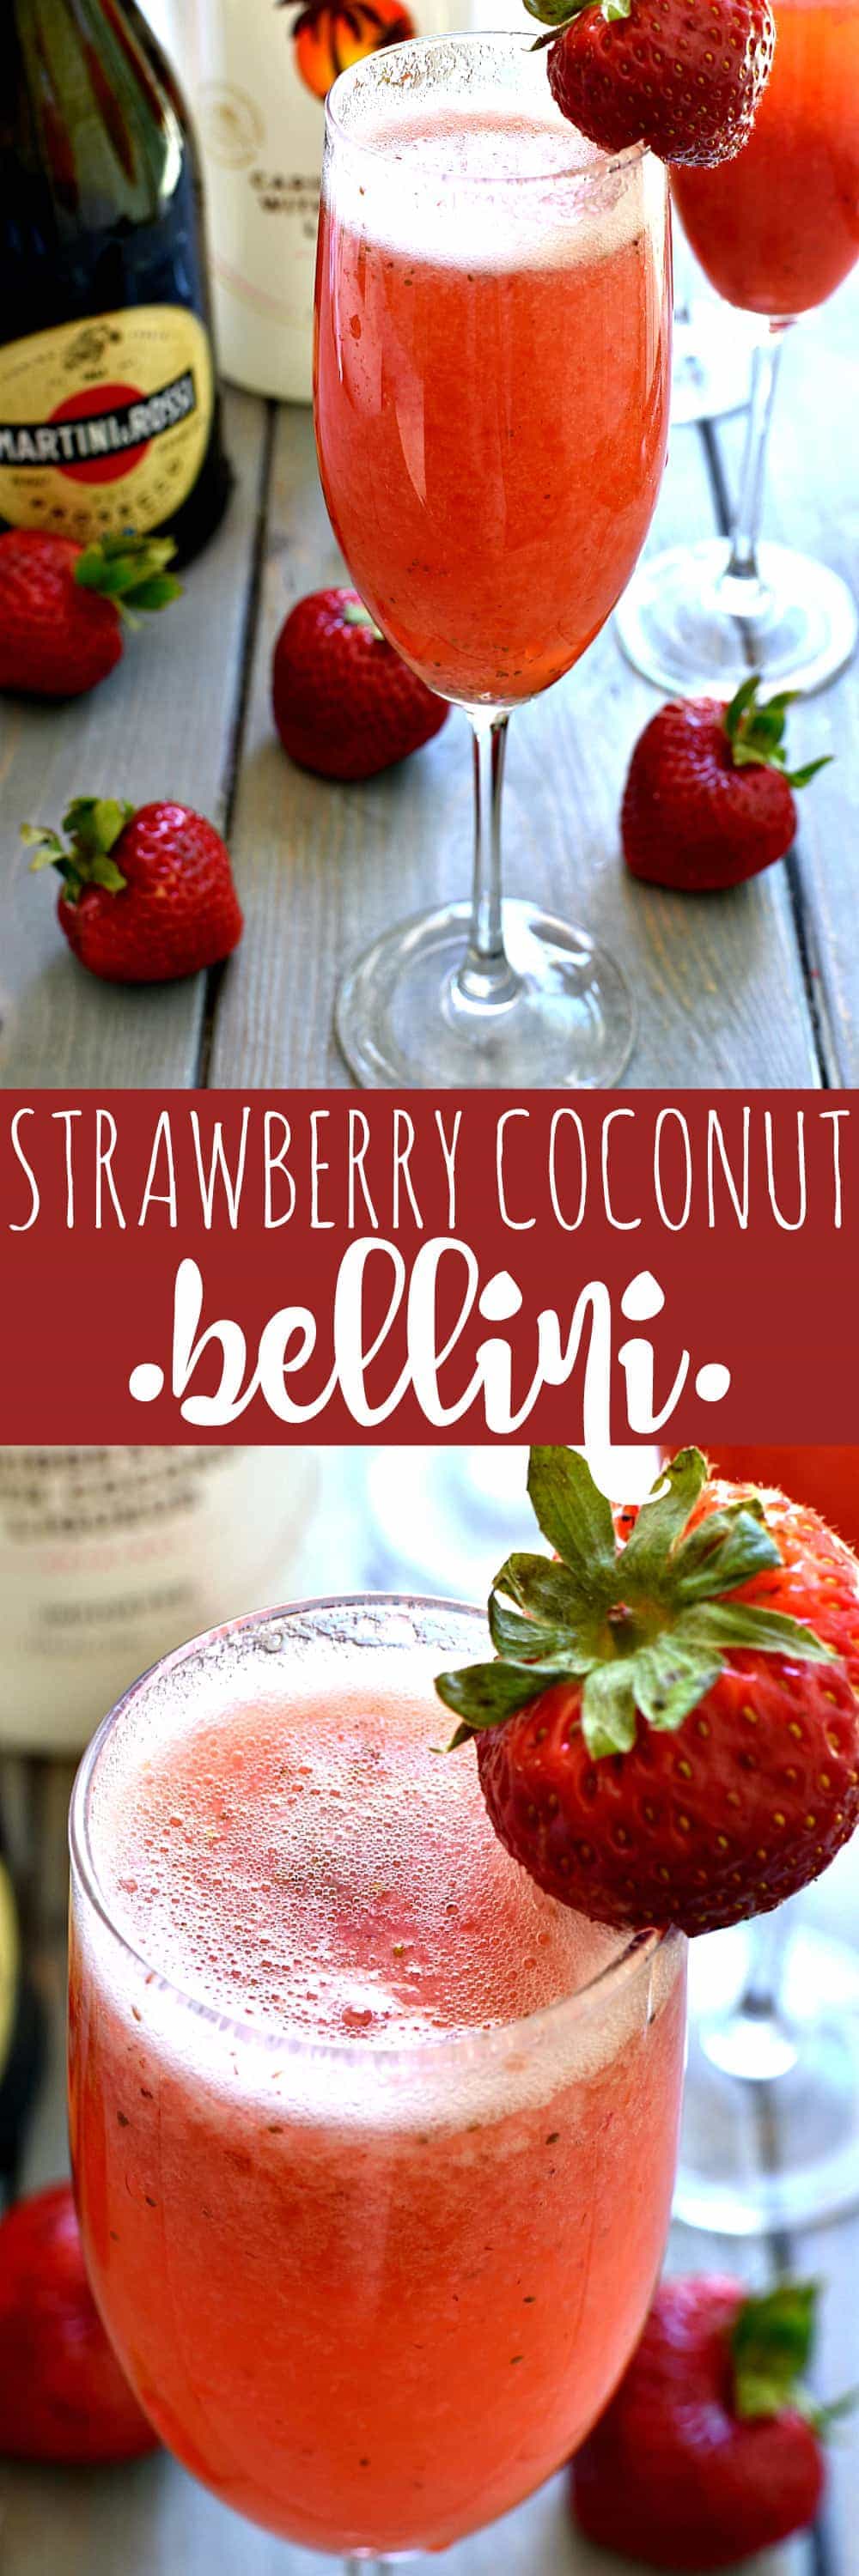 This Strawberry Coconut Bellini is a deliciously sweet, refreshing, tropical twist on the original! Made with just four ingredients, it's the perfect cocktail for brunch, ladies night, or any night....and you won't believe how easy it is to make!